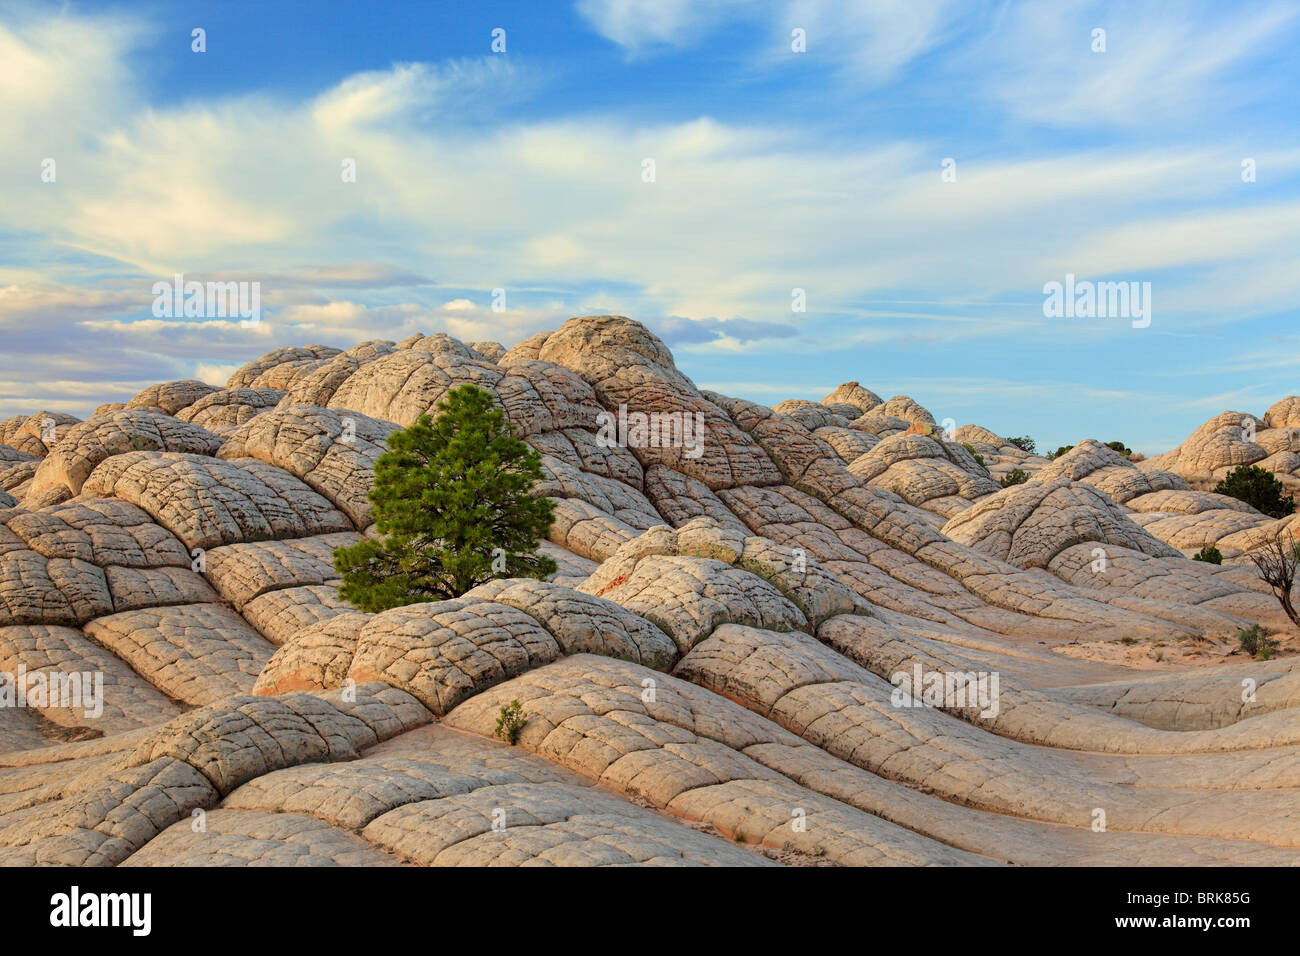 Rock formations in the White Pocket unit of the Vermilion Cliffs National Monument, Arizona Stock Photo